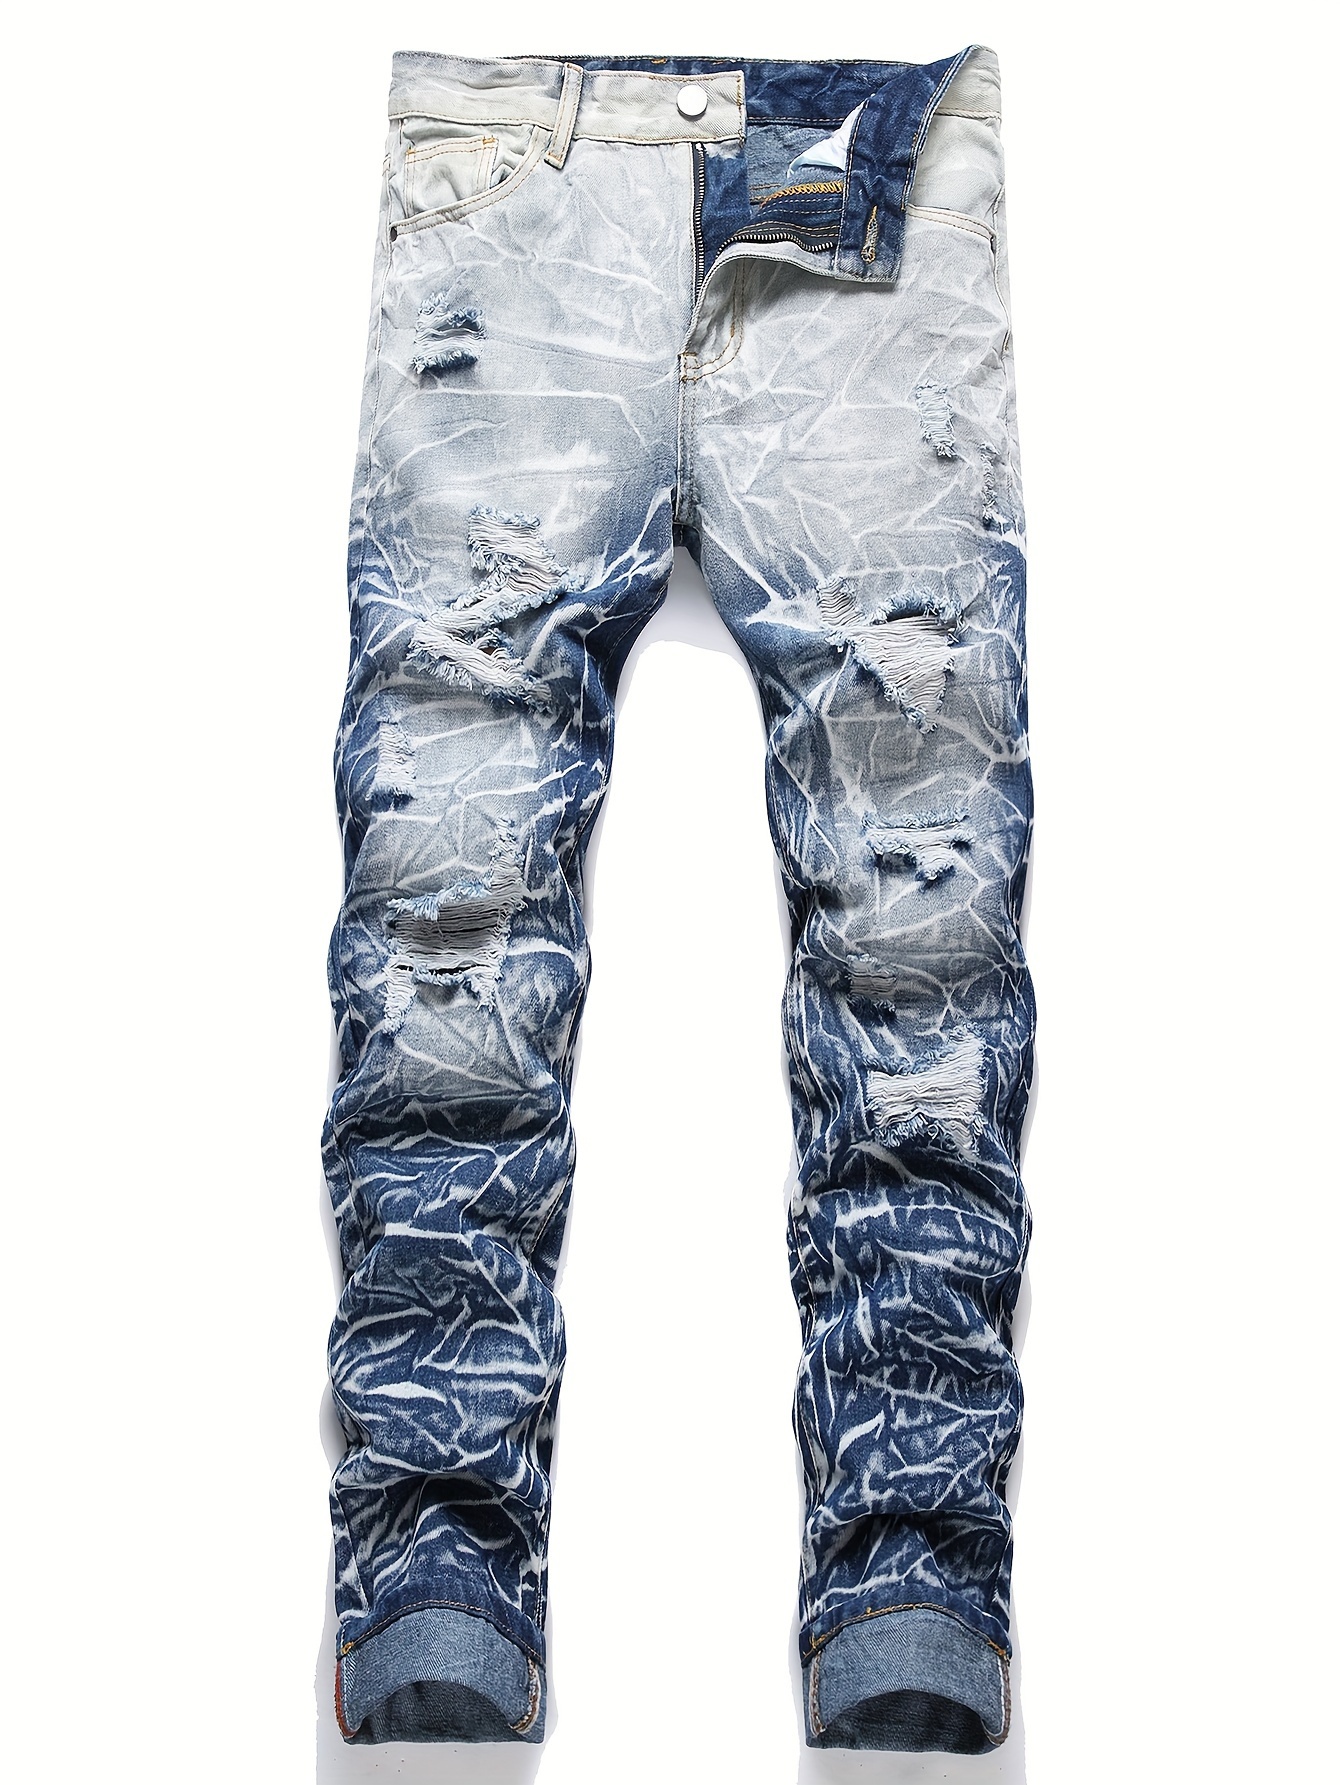 Men's Red Jeans Skinny Fit Ripped Destroyed Distressed Stylish Denim Jeans